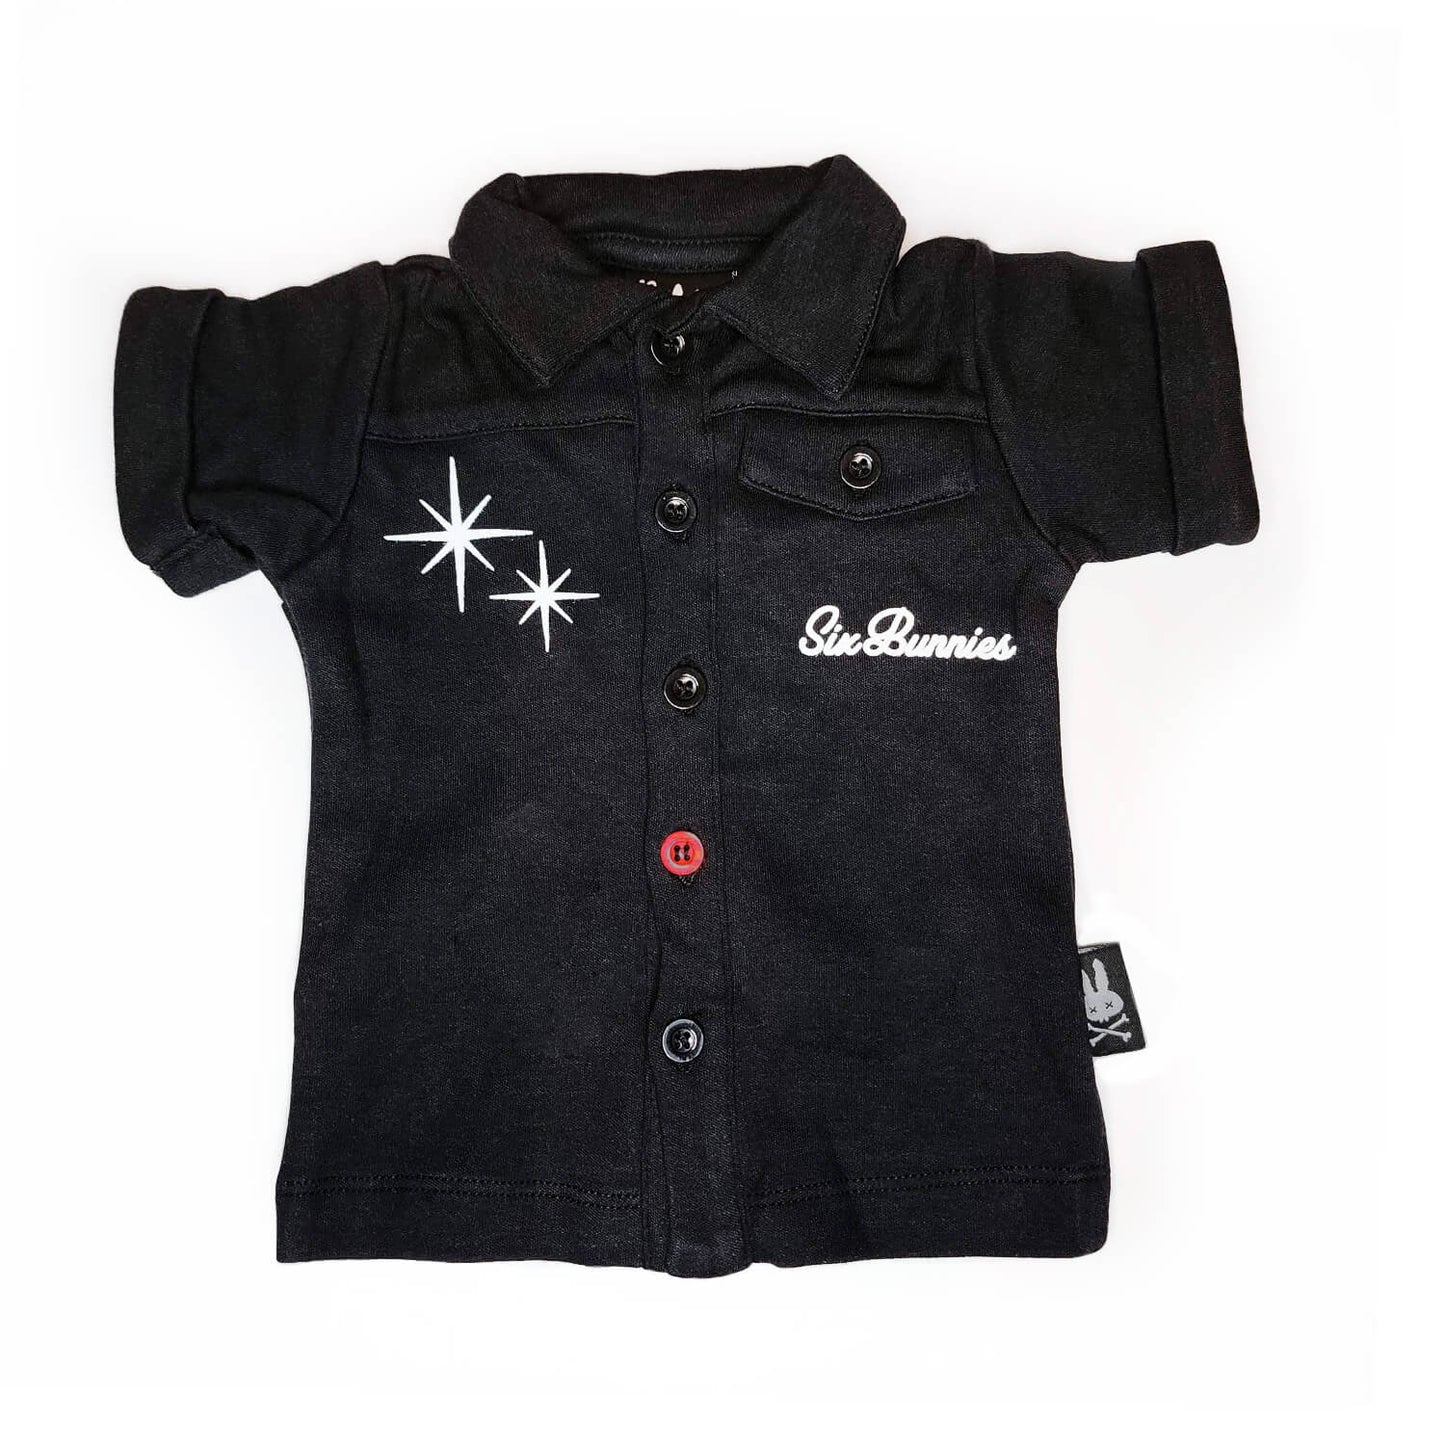 Black baby button up shirt with Born to rock on the back. 